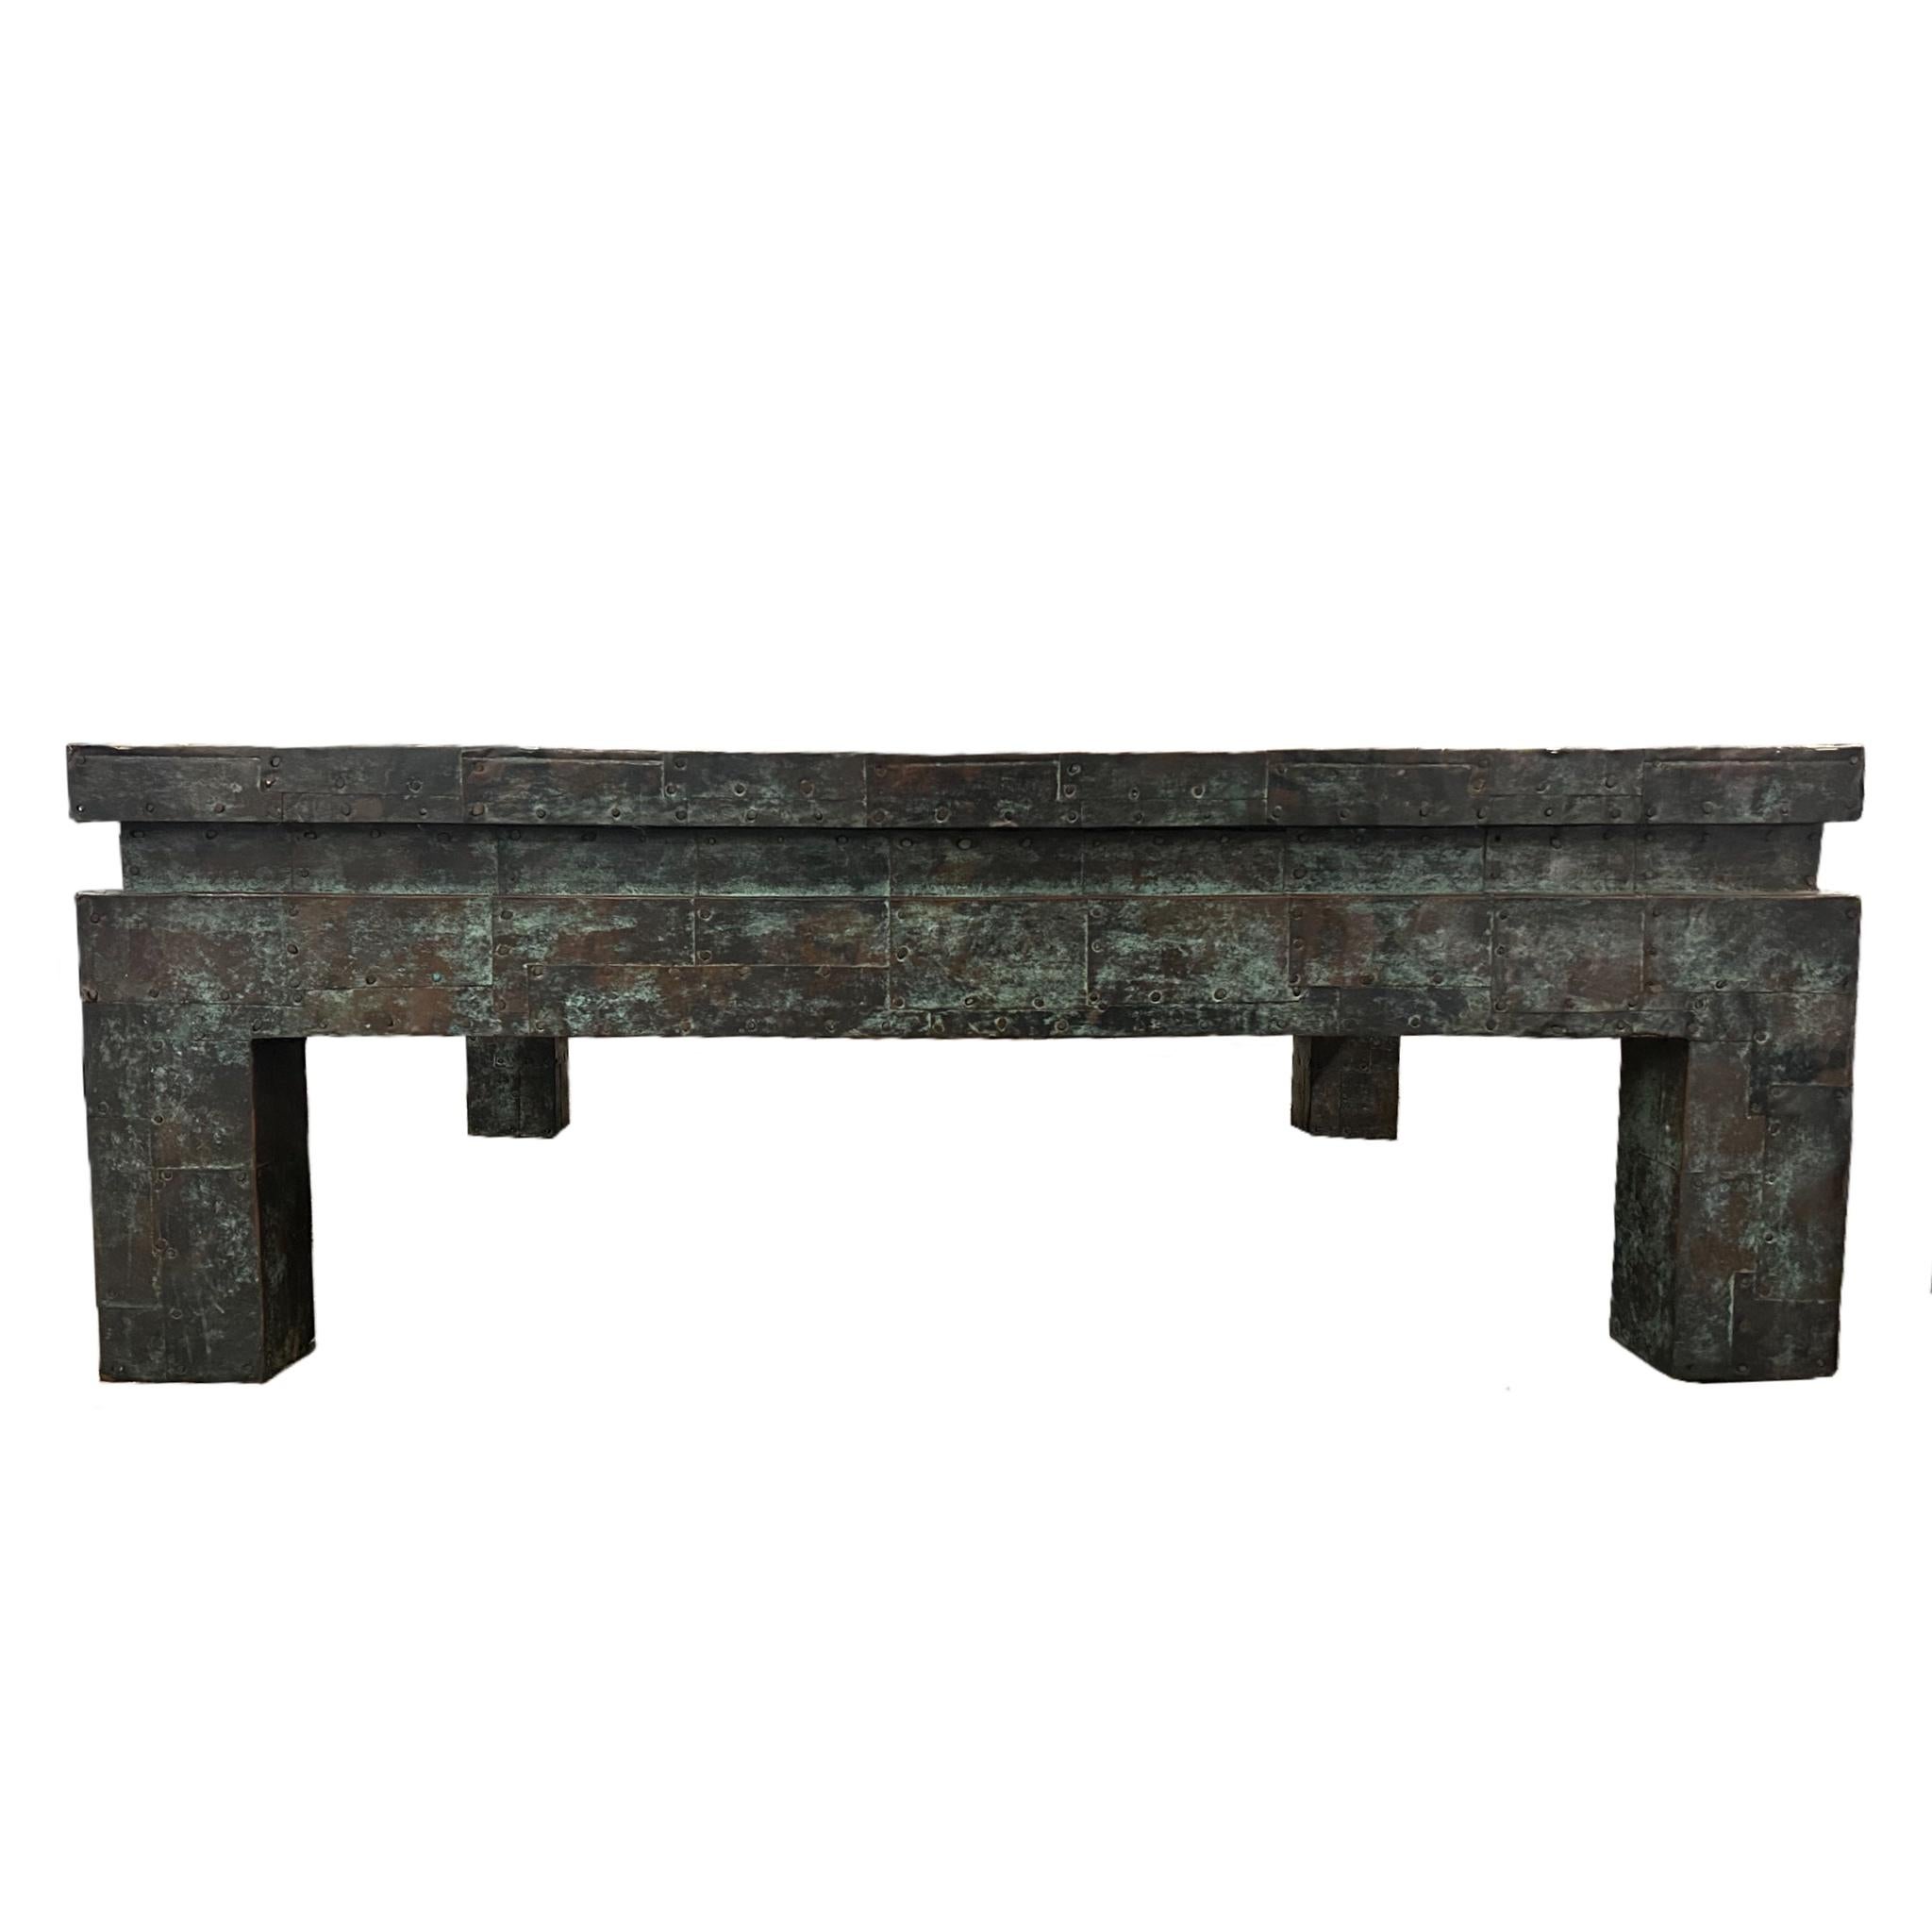 Maitland Smith Large Patchwork Coffee Table

Heavy Patina Throughout



Measurements
  
     Height : 18.25 in
  
     Width : 50 in
  
     Depth : 50 in